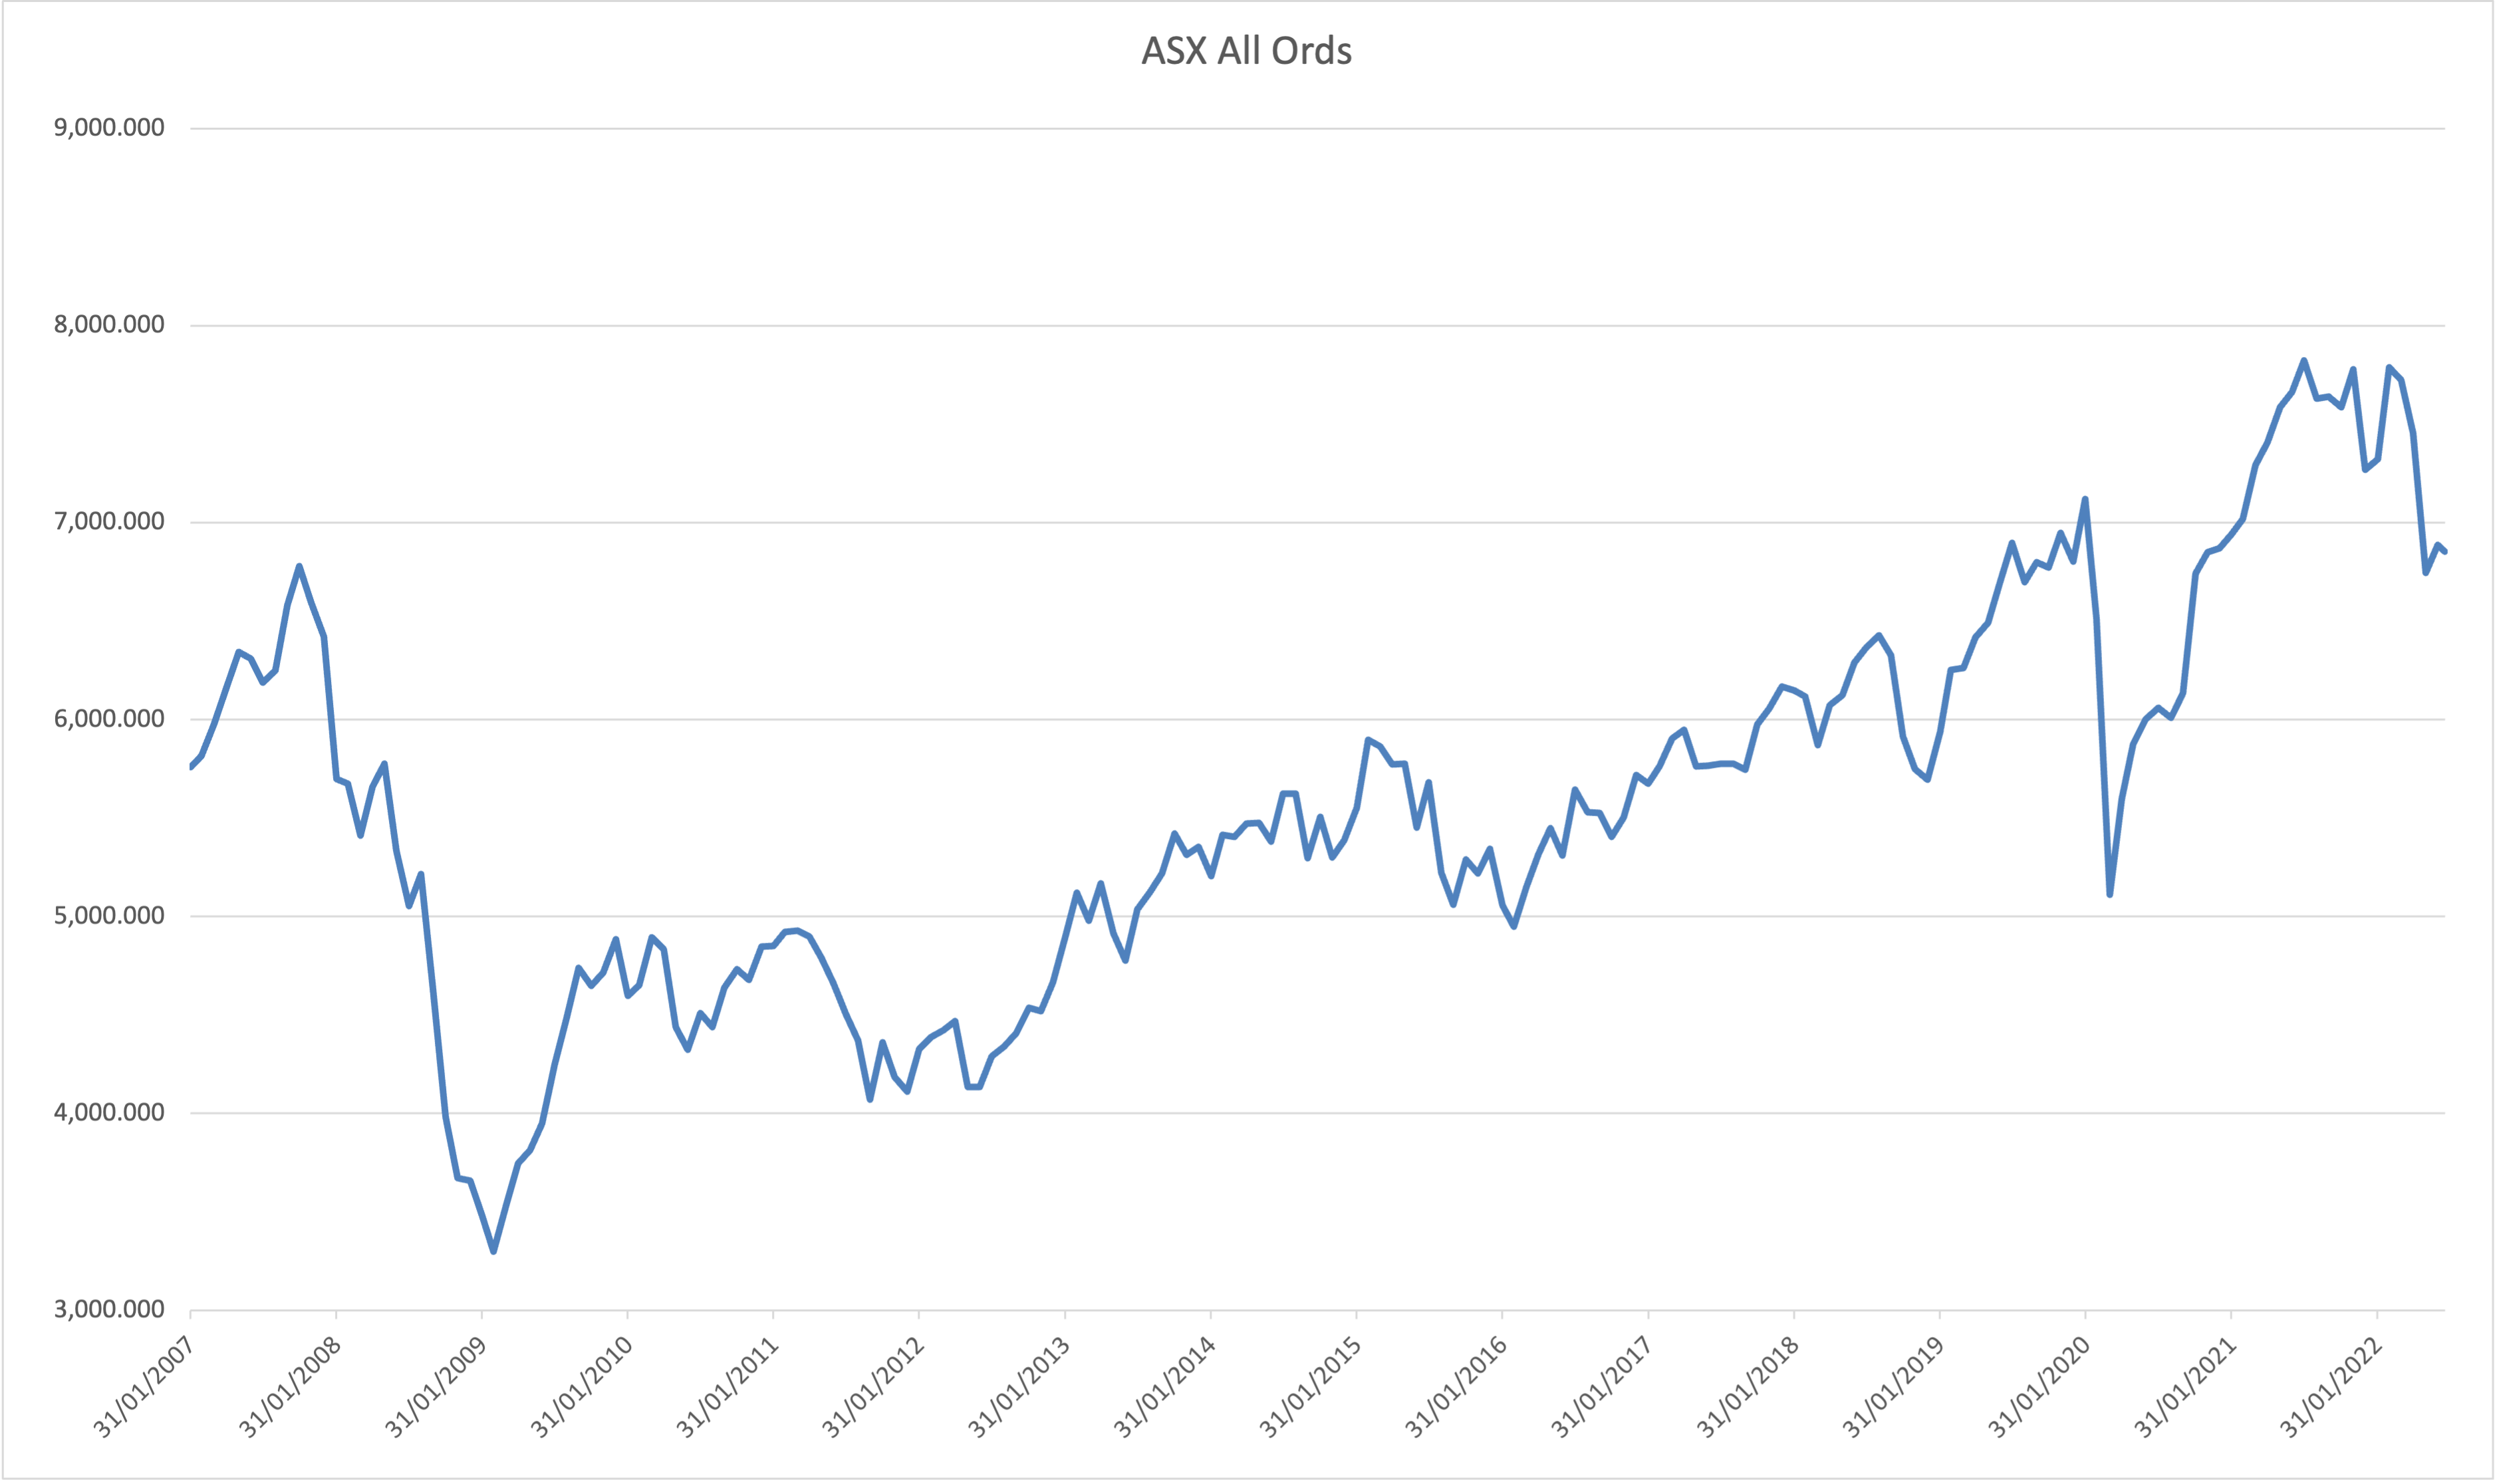 S&P/ASX All Ords Index. 